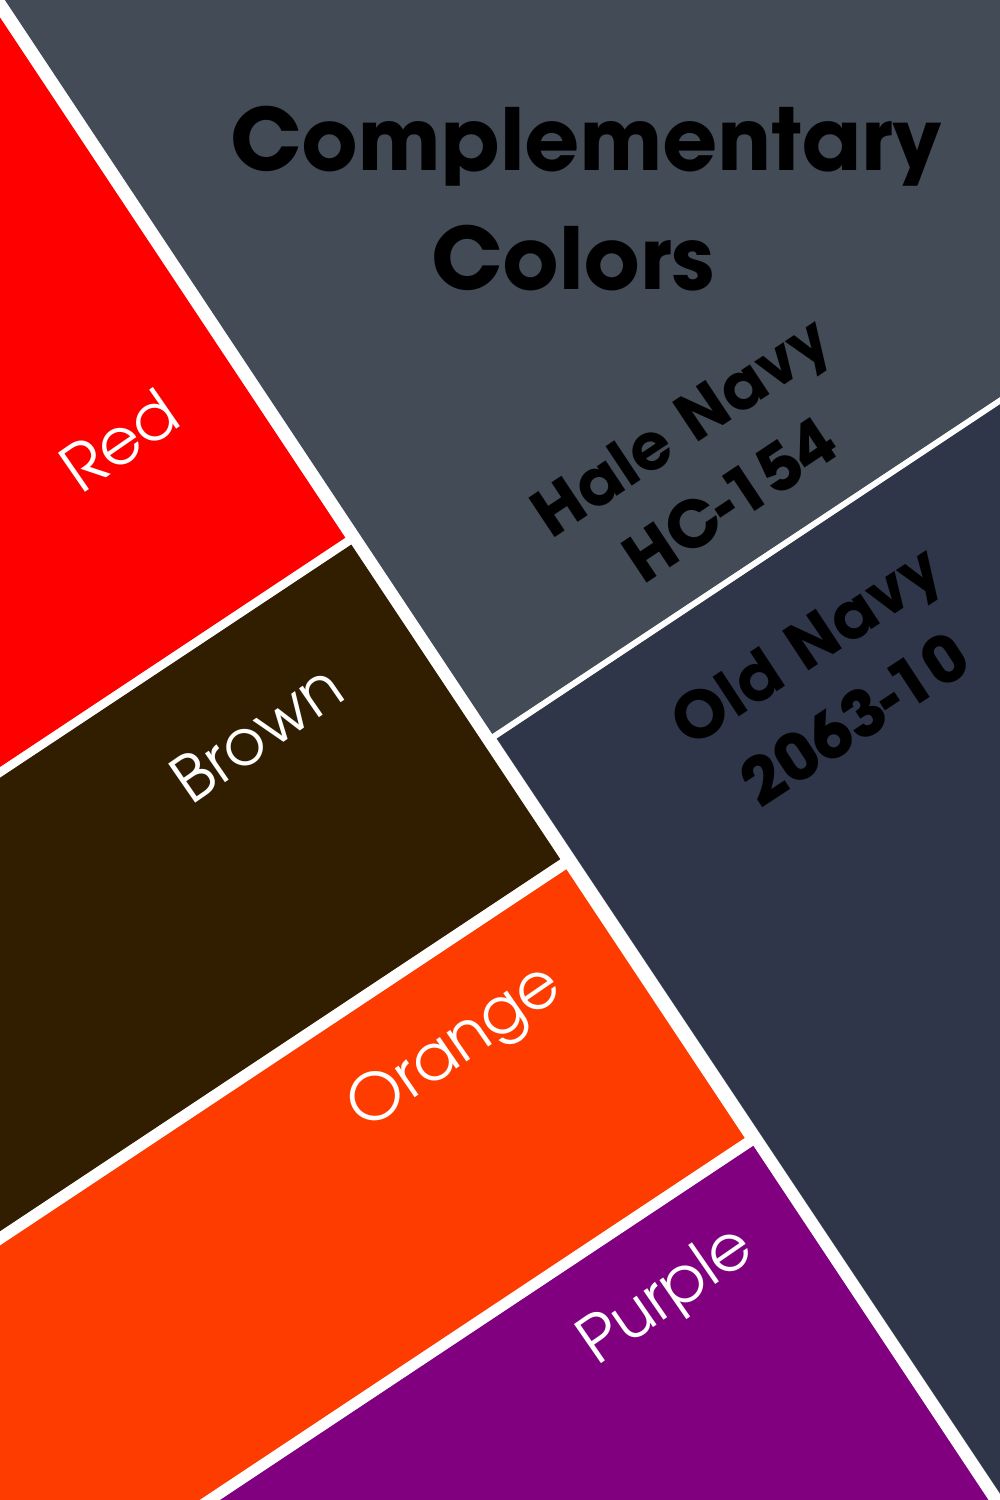 Hale Navy vs. Old Navy Complementary Colors